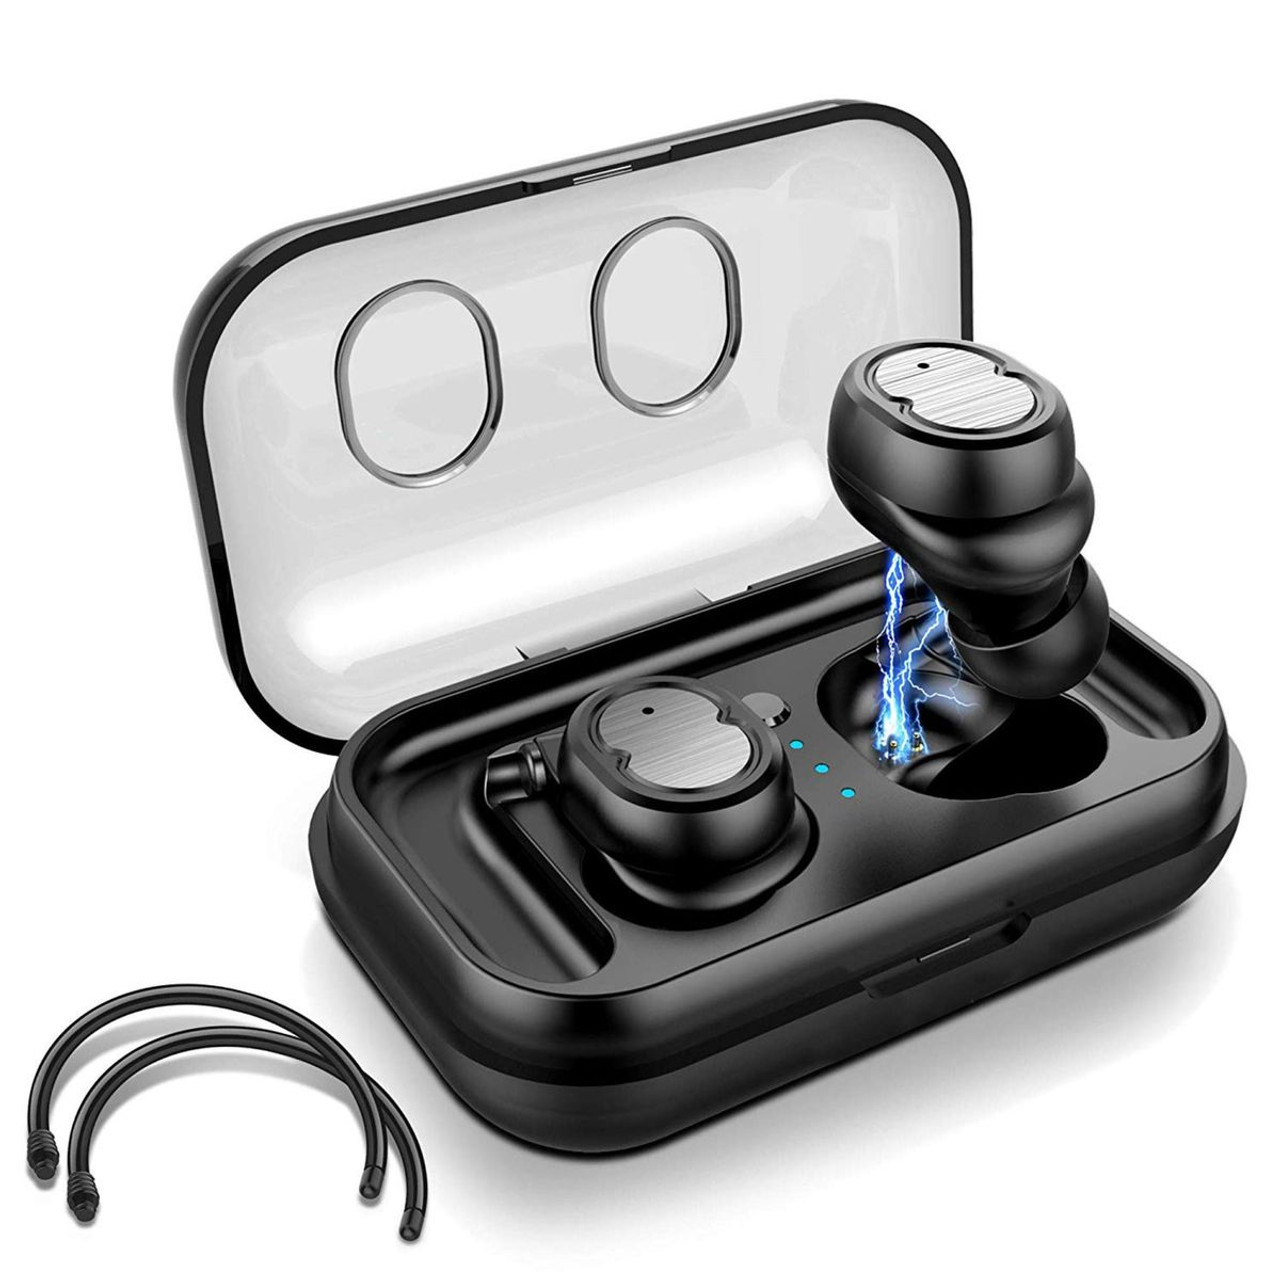 TWS Wireless 5.0 Earbuds product image